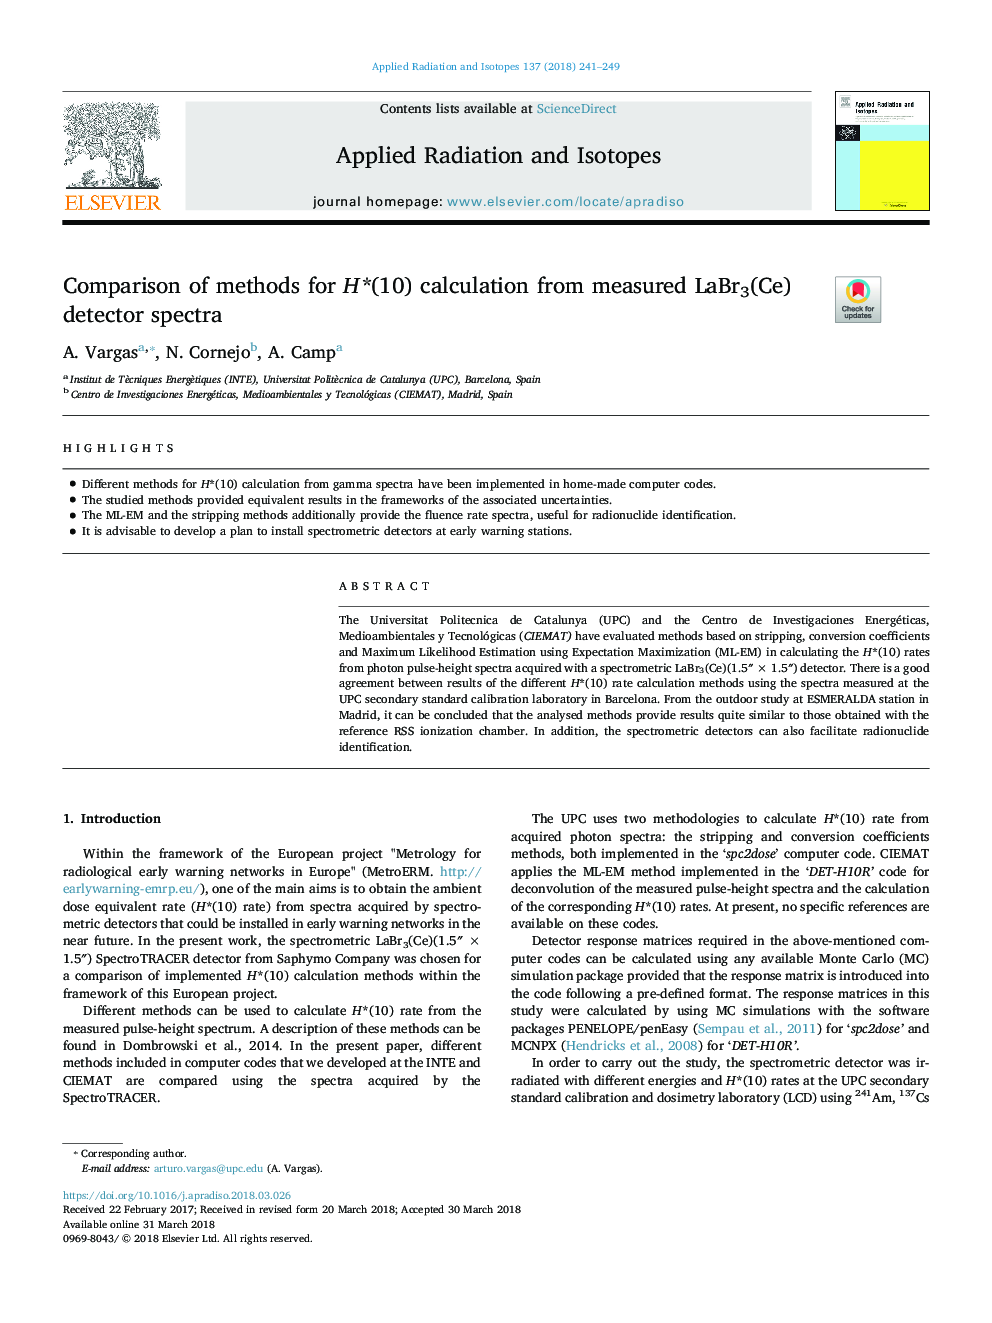 Comparison of methods for H*(10) calculation from measured LaBr3(Ce) detector spectra